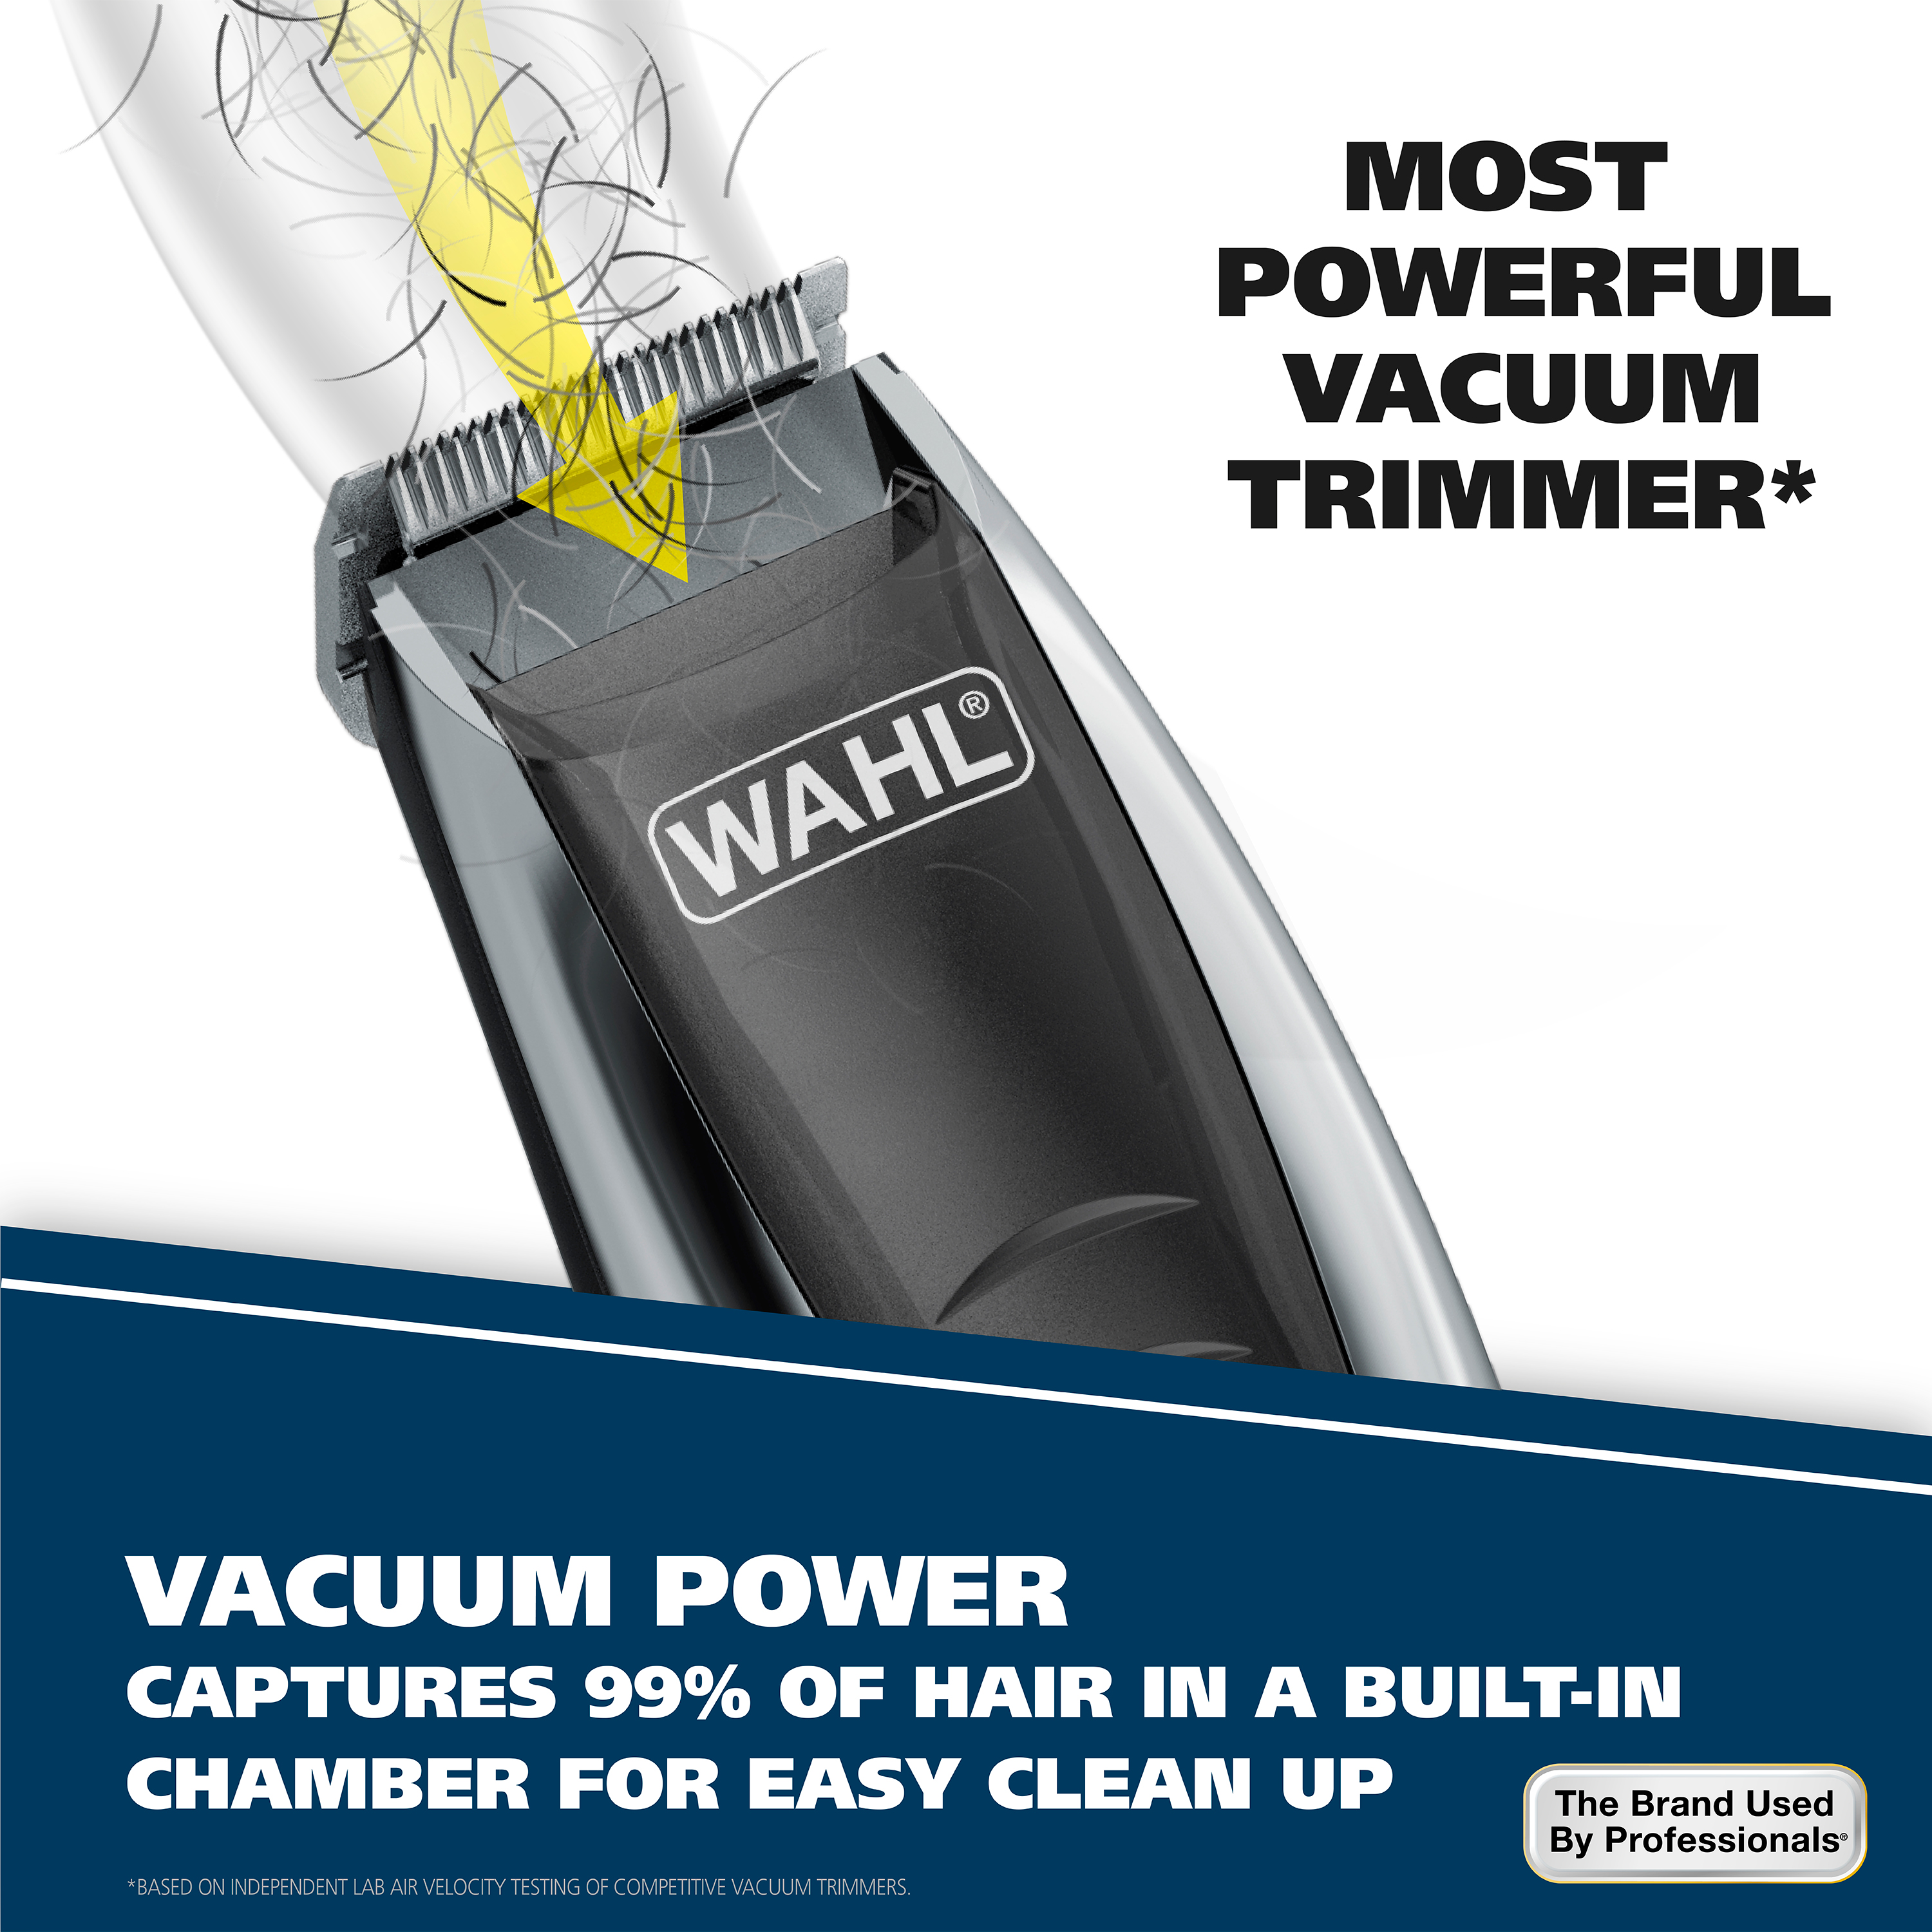 Wahl Lithium Ion Vacuum Trimmer Kit with Adjustable Vacuum Intake - Model #9870 - image 4 of 10